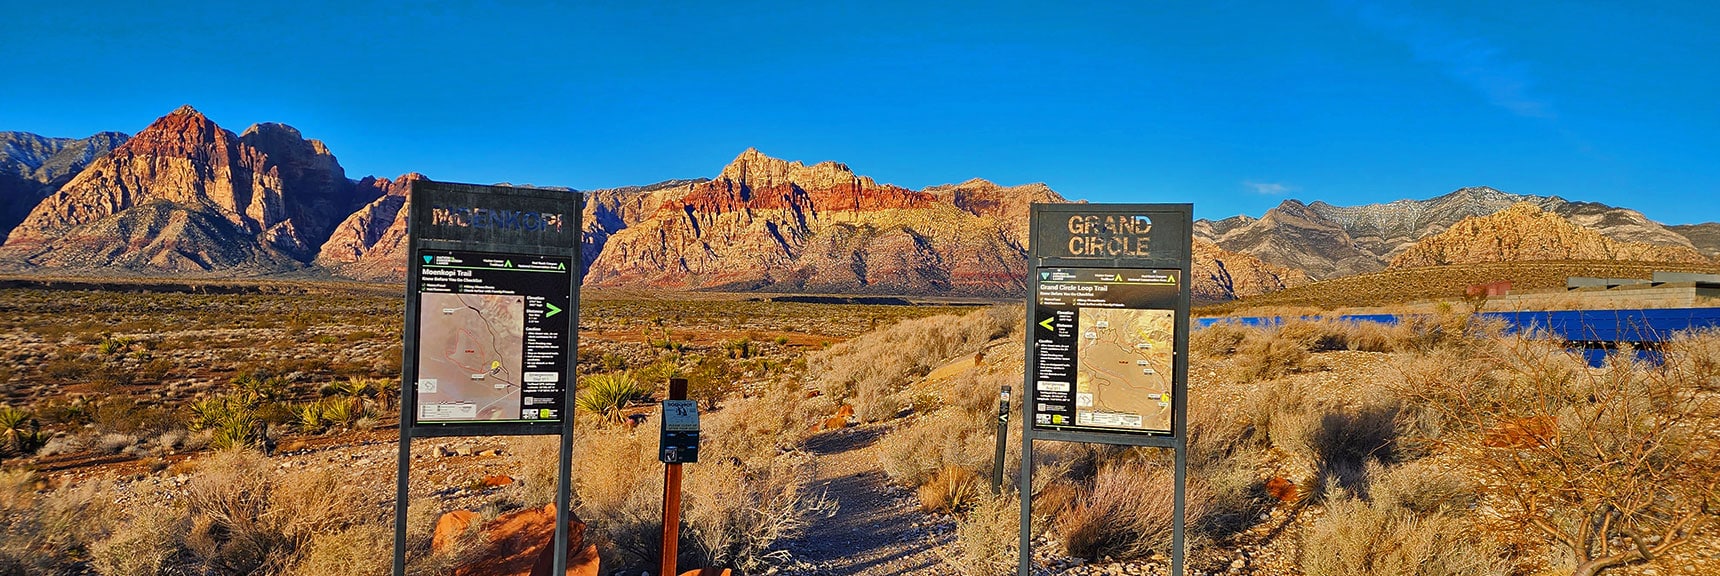 Trailhead at Red Rock Canyon Visitor Center | Grand Circle Loop | Red Rock Canyon National Conservation Area, Nevada